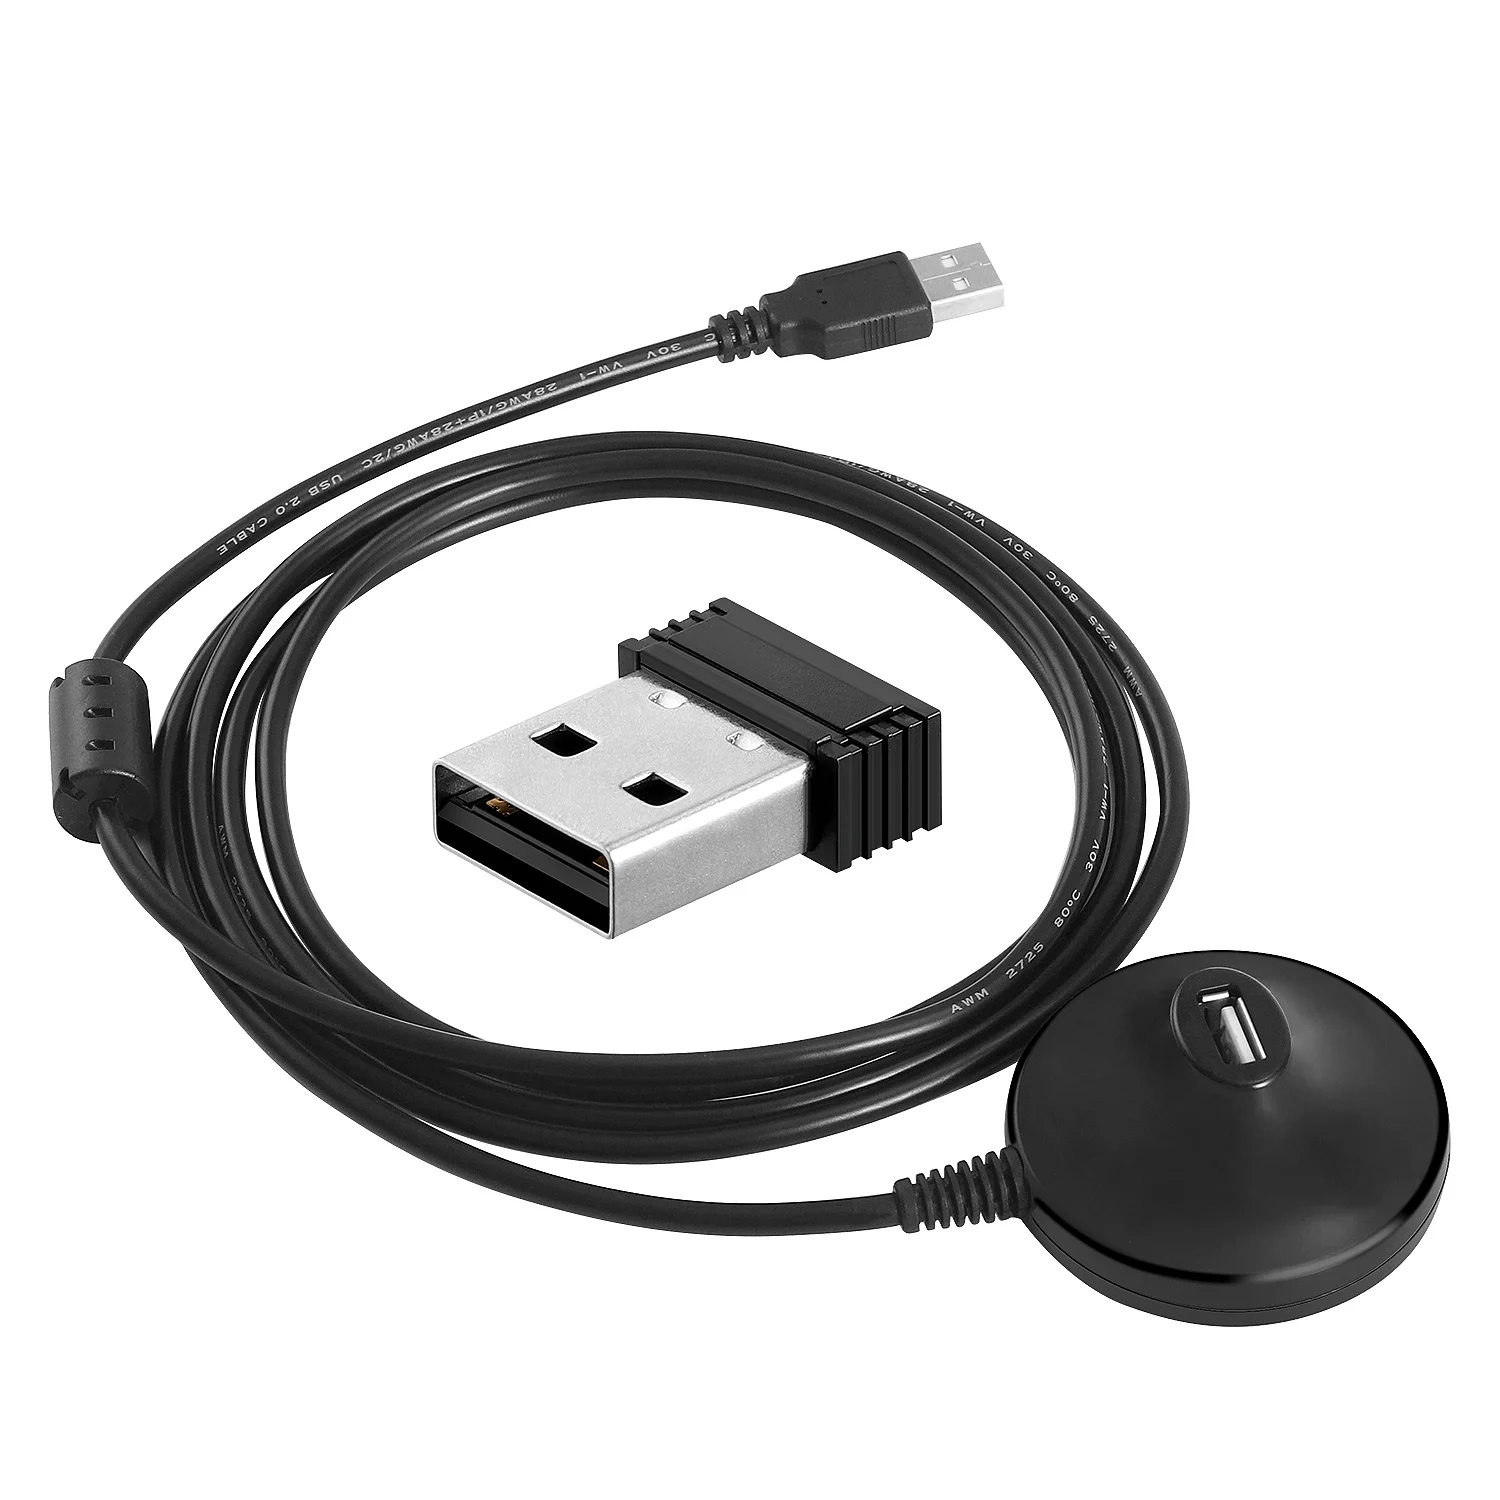 Loodgieter Hong Kong cement Adapter Type A Usb Ant+ Dongle For Cycling App Zwift Tacx Bkool - Buy Ant+  Dongle,Type A Usb Ant+ Dongle Product on Alibaba.com